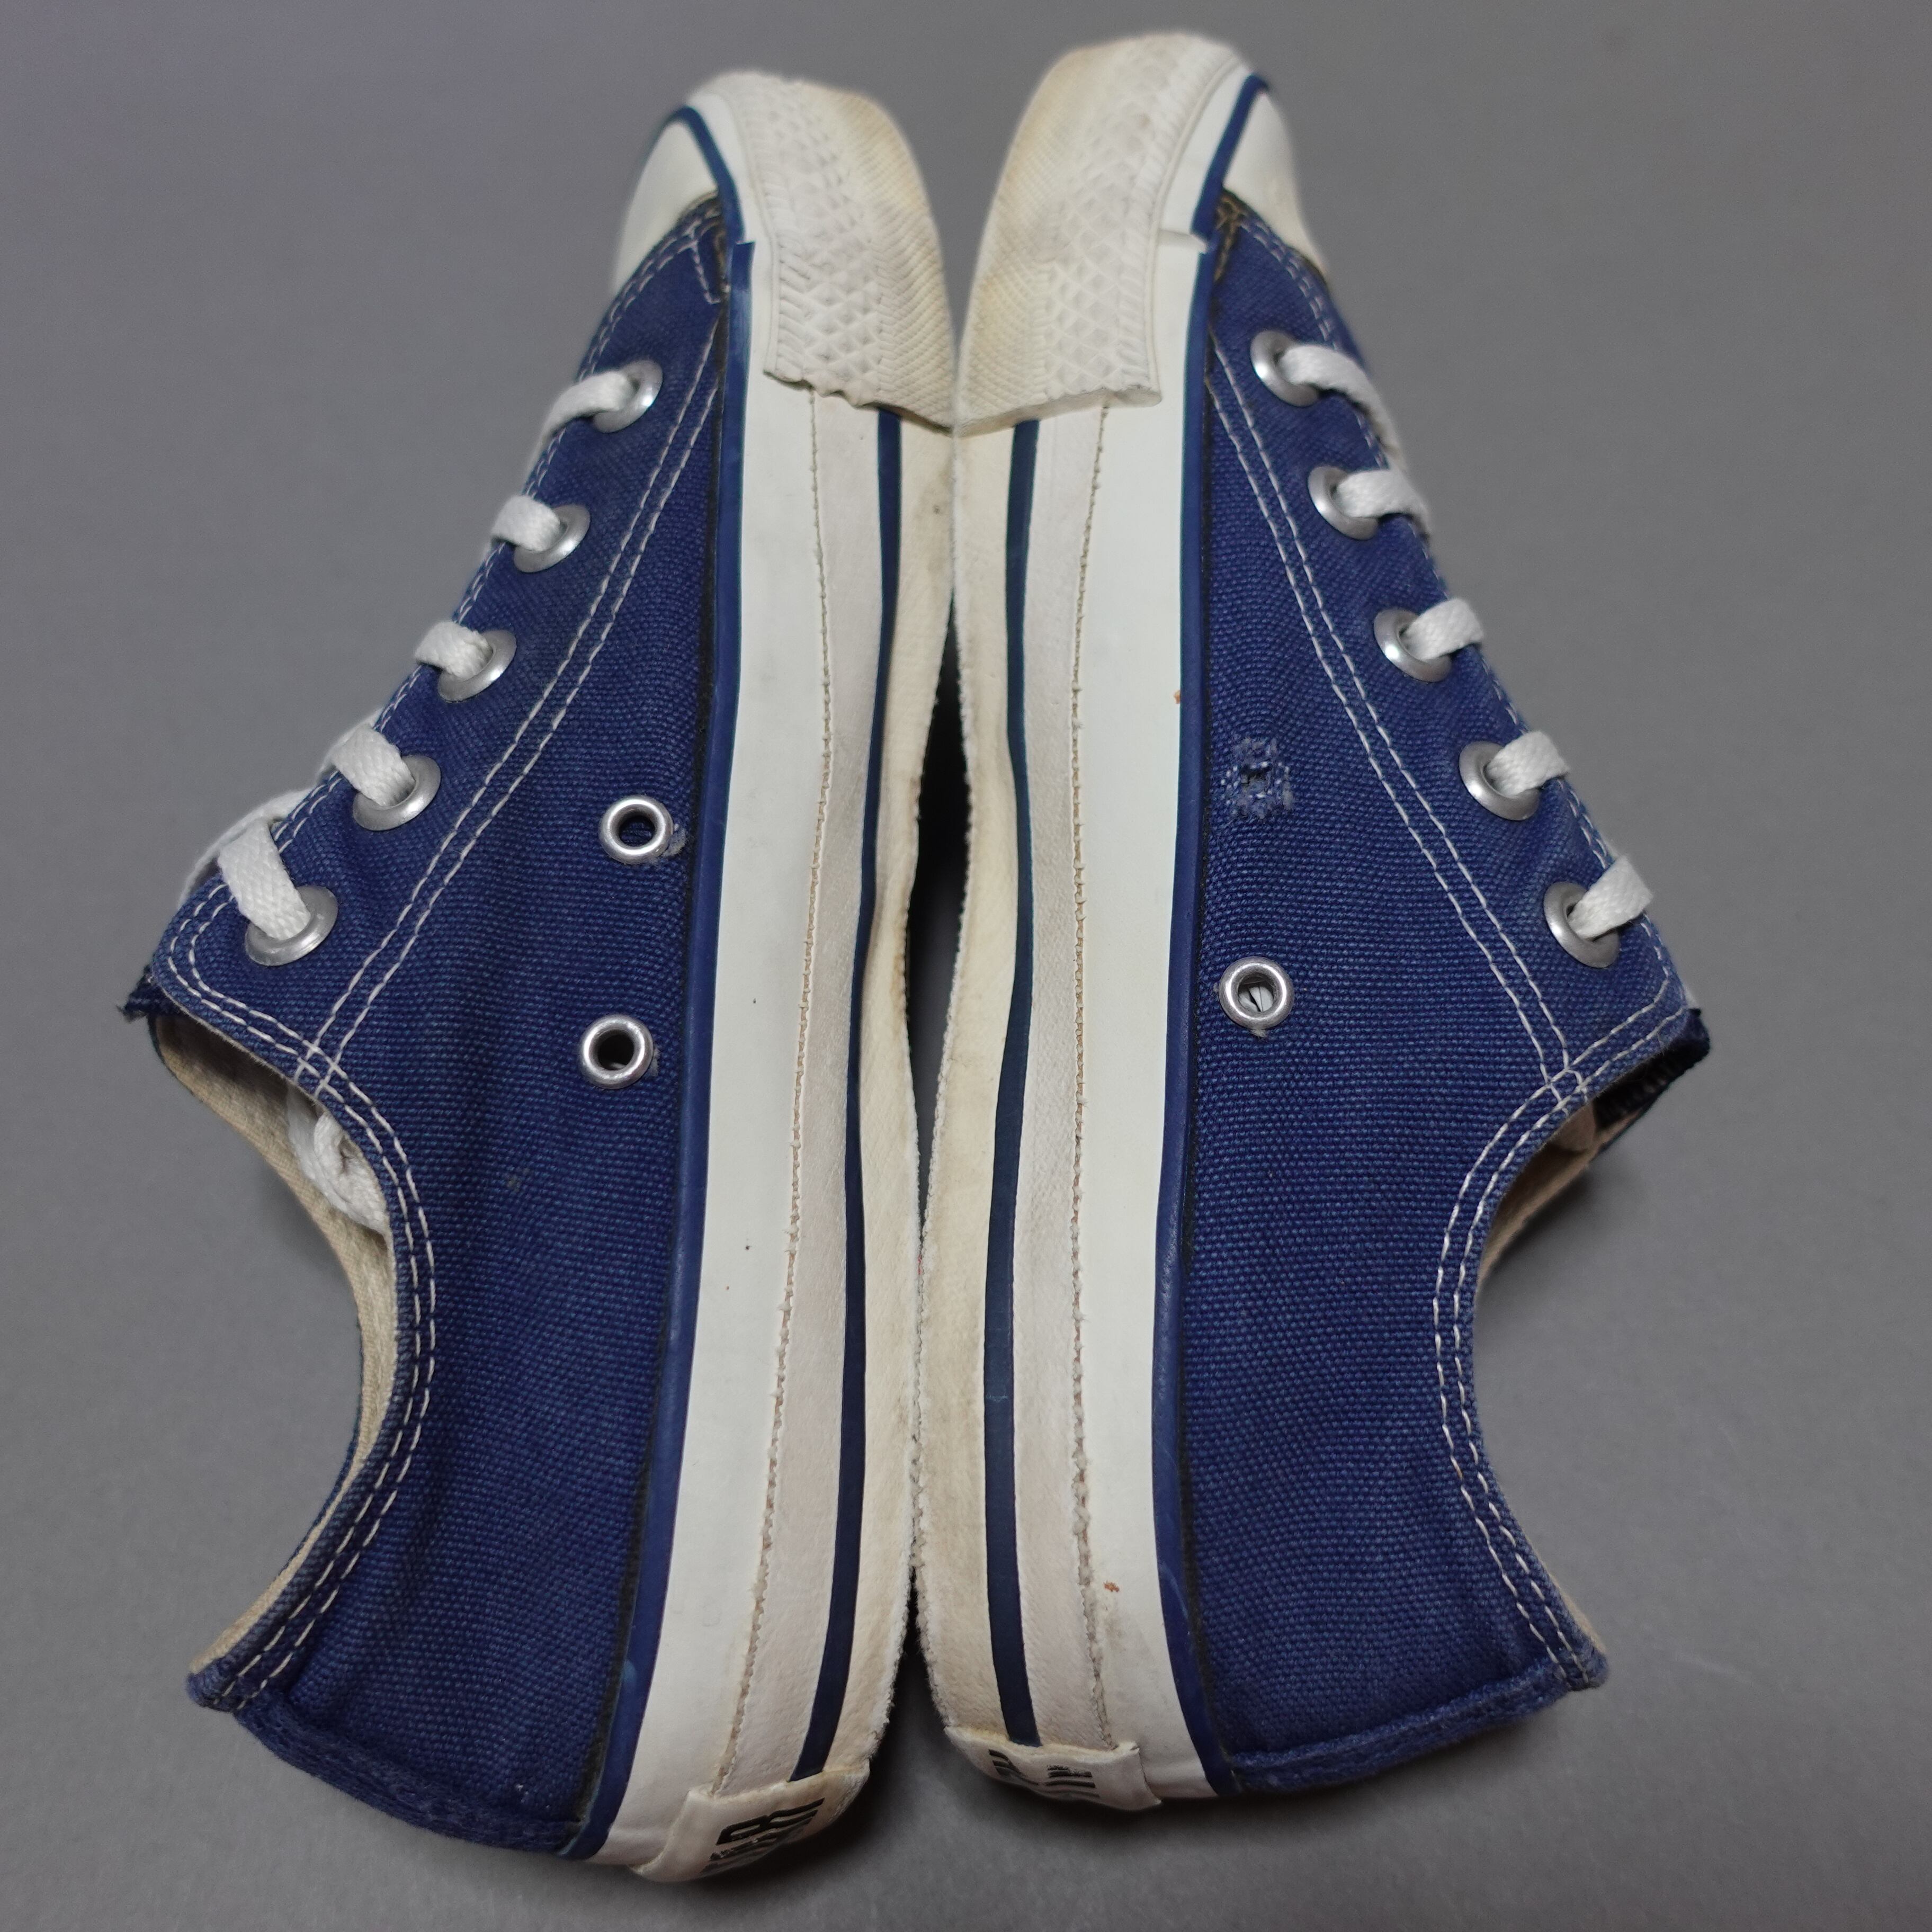 CONVERSE made in USA 5 1/2 vintage